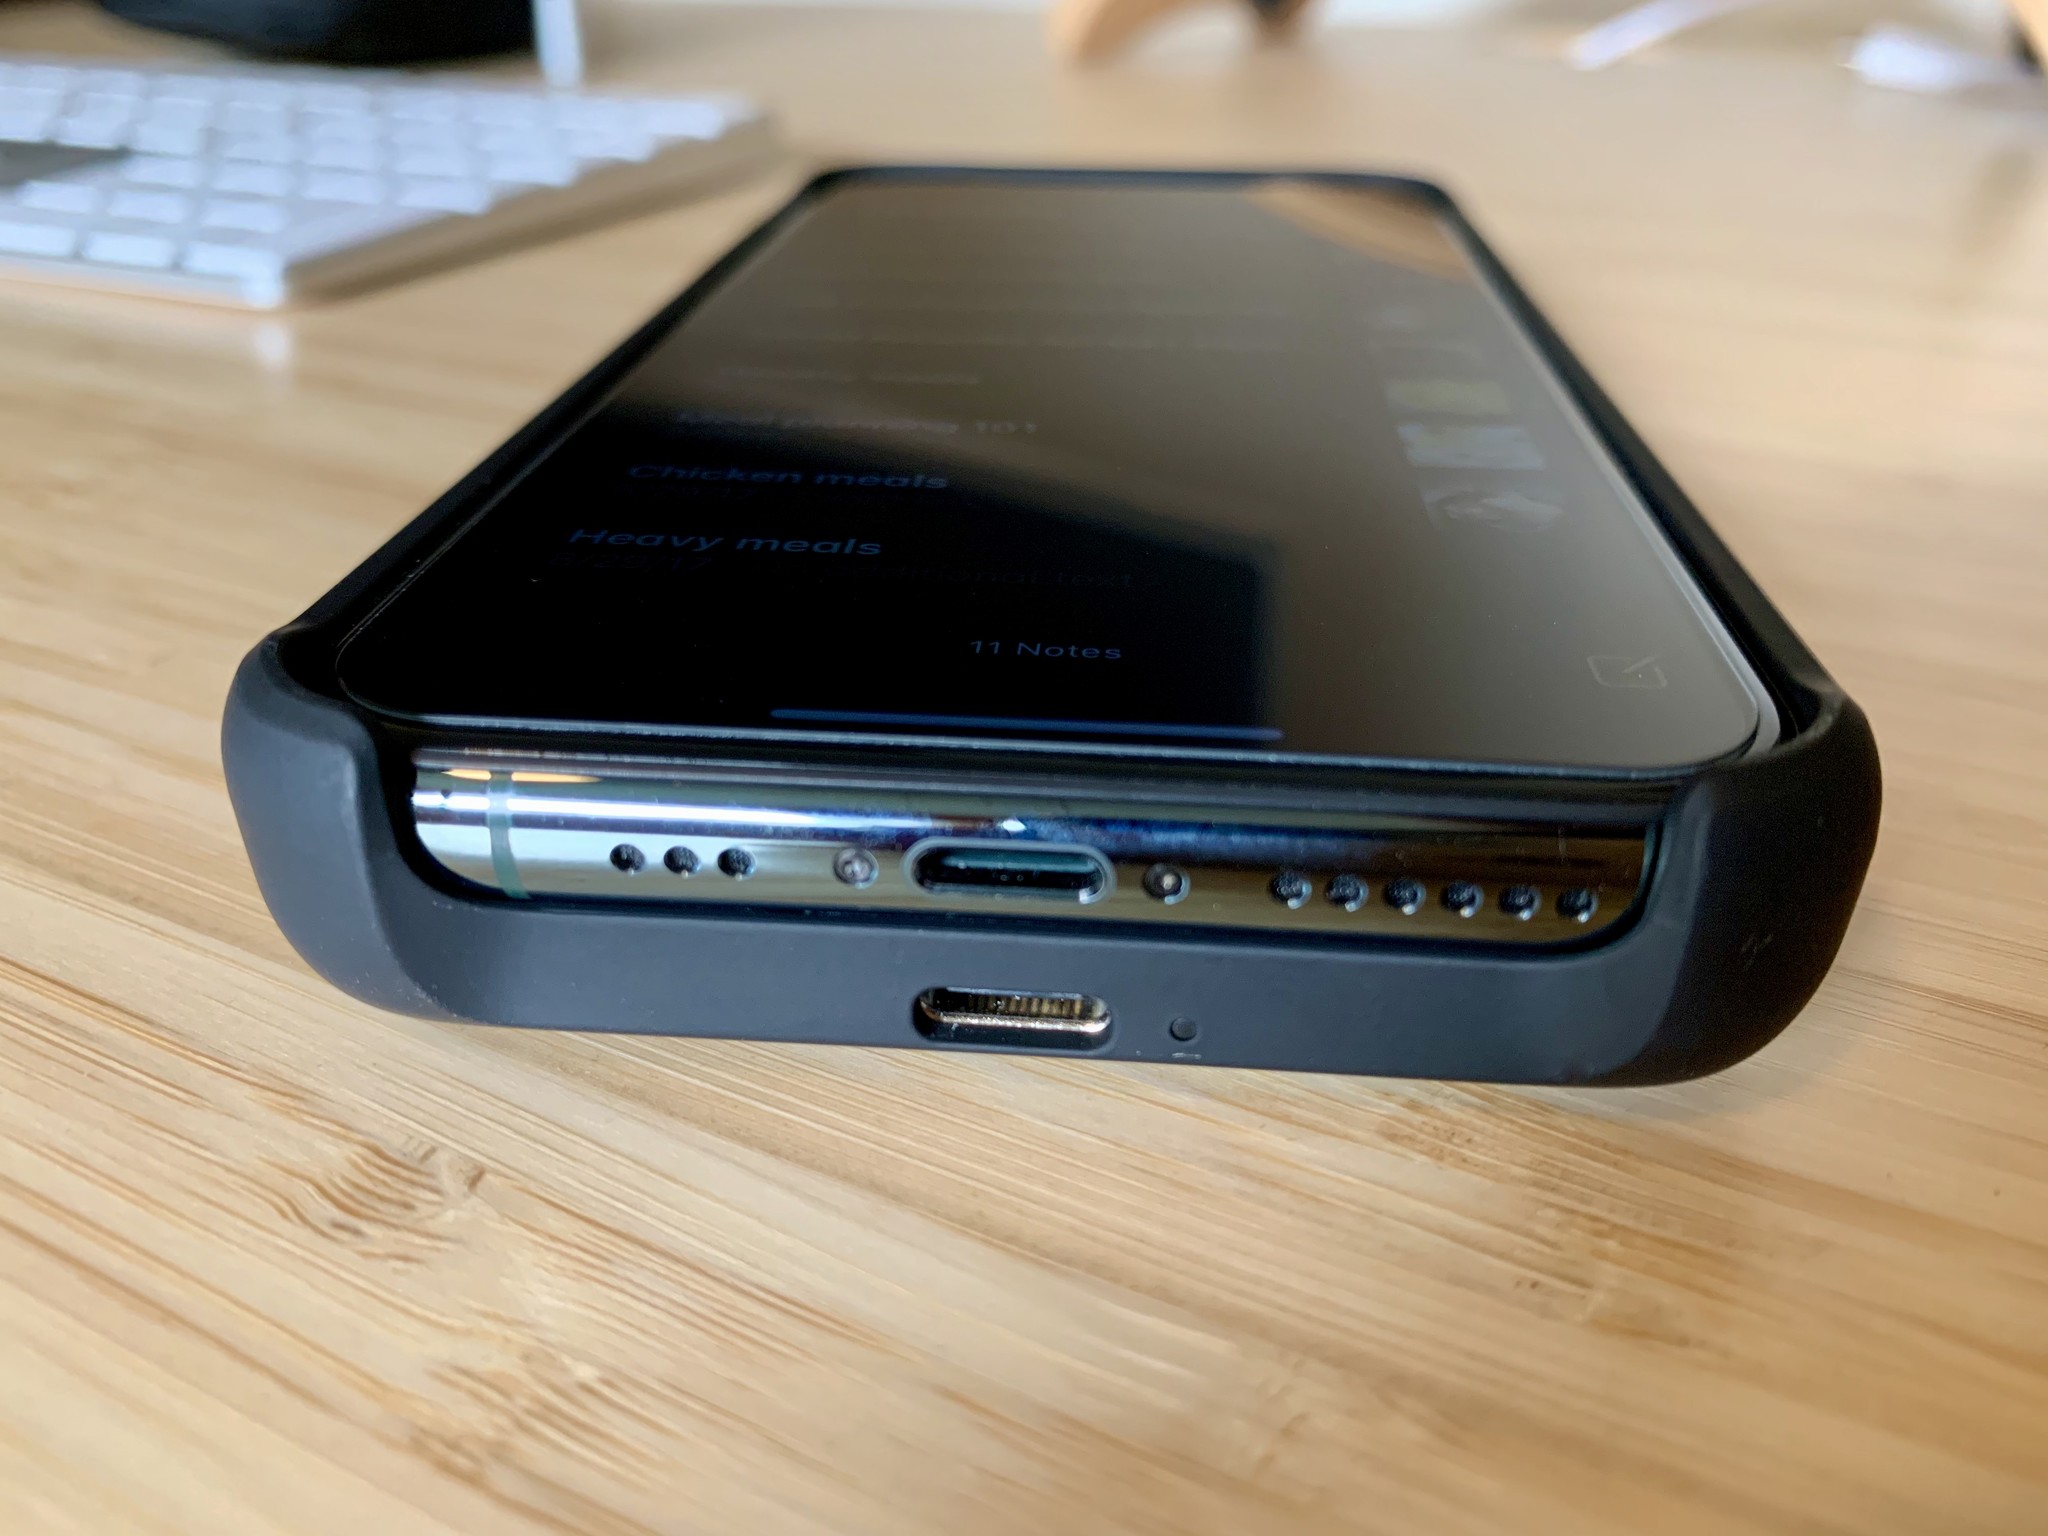 Mophie Juice Pack Access